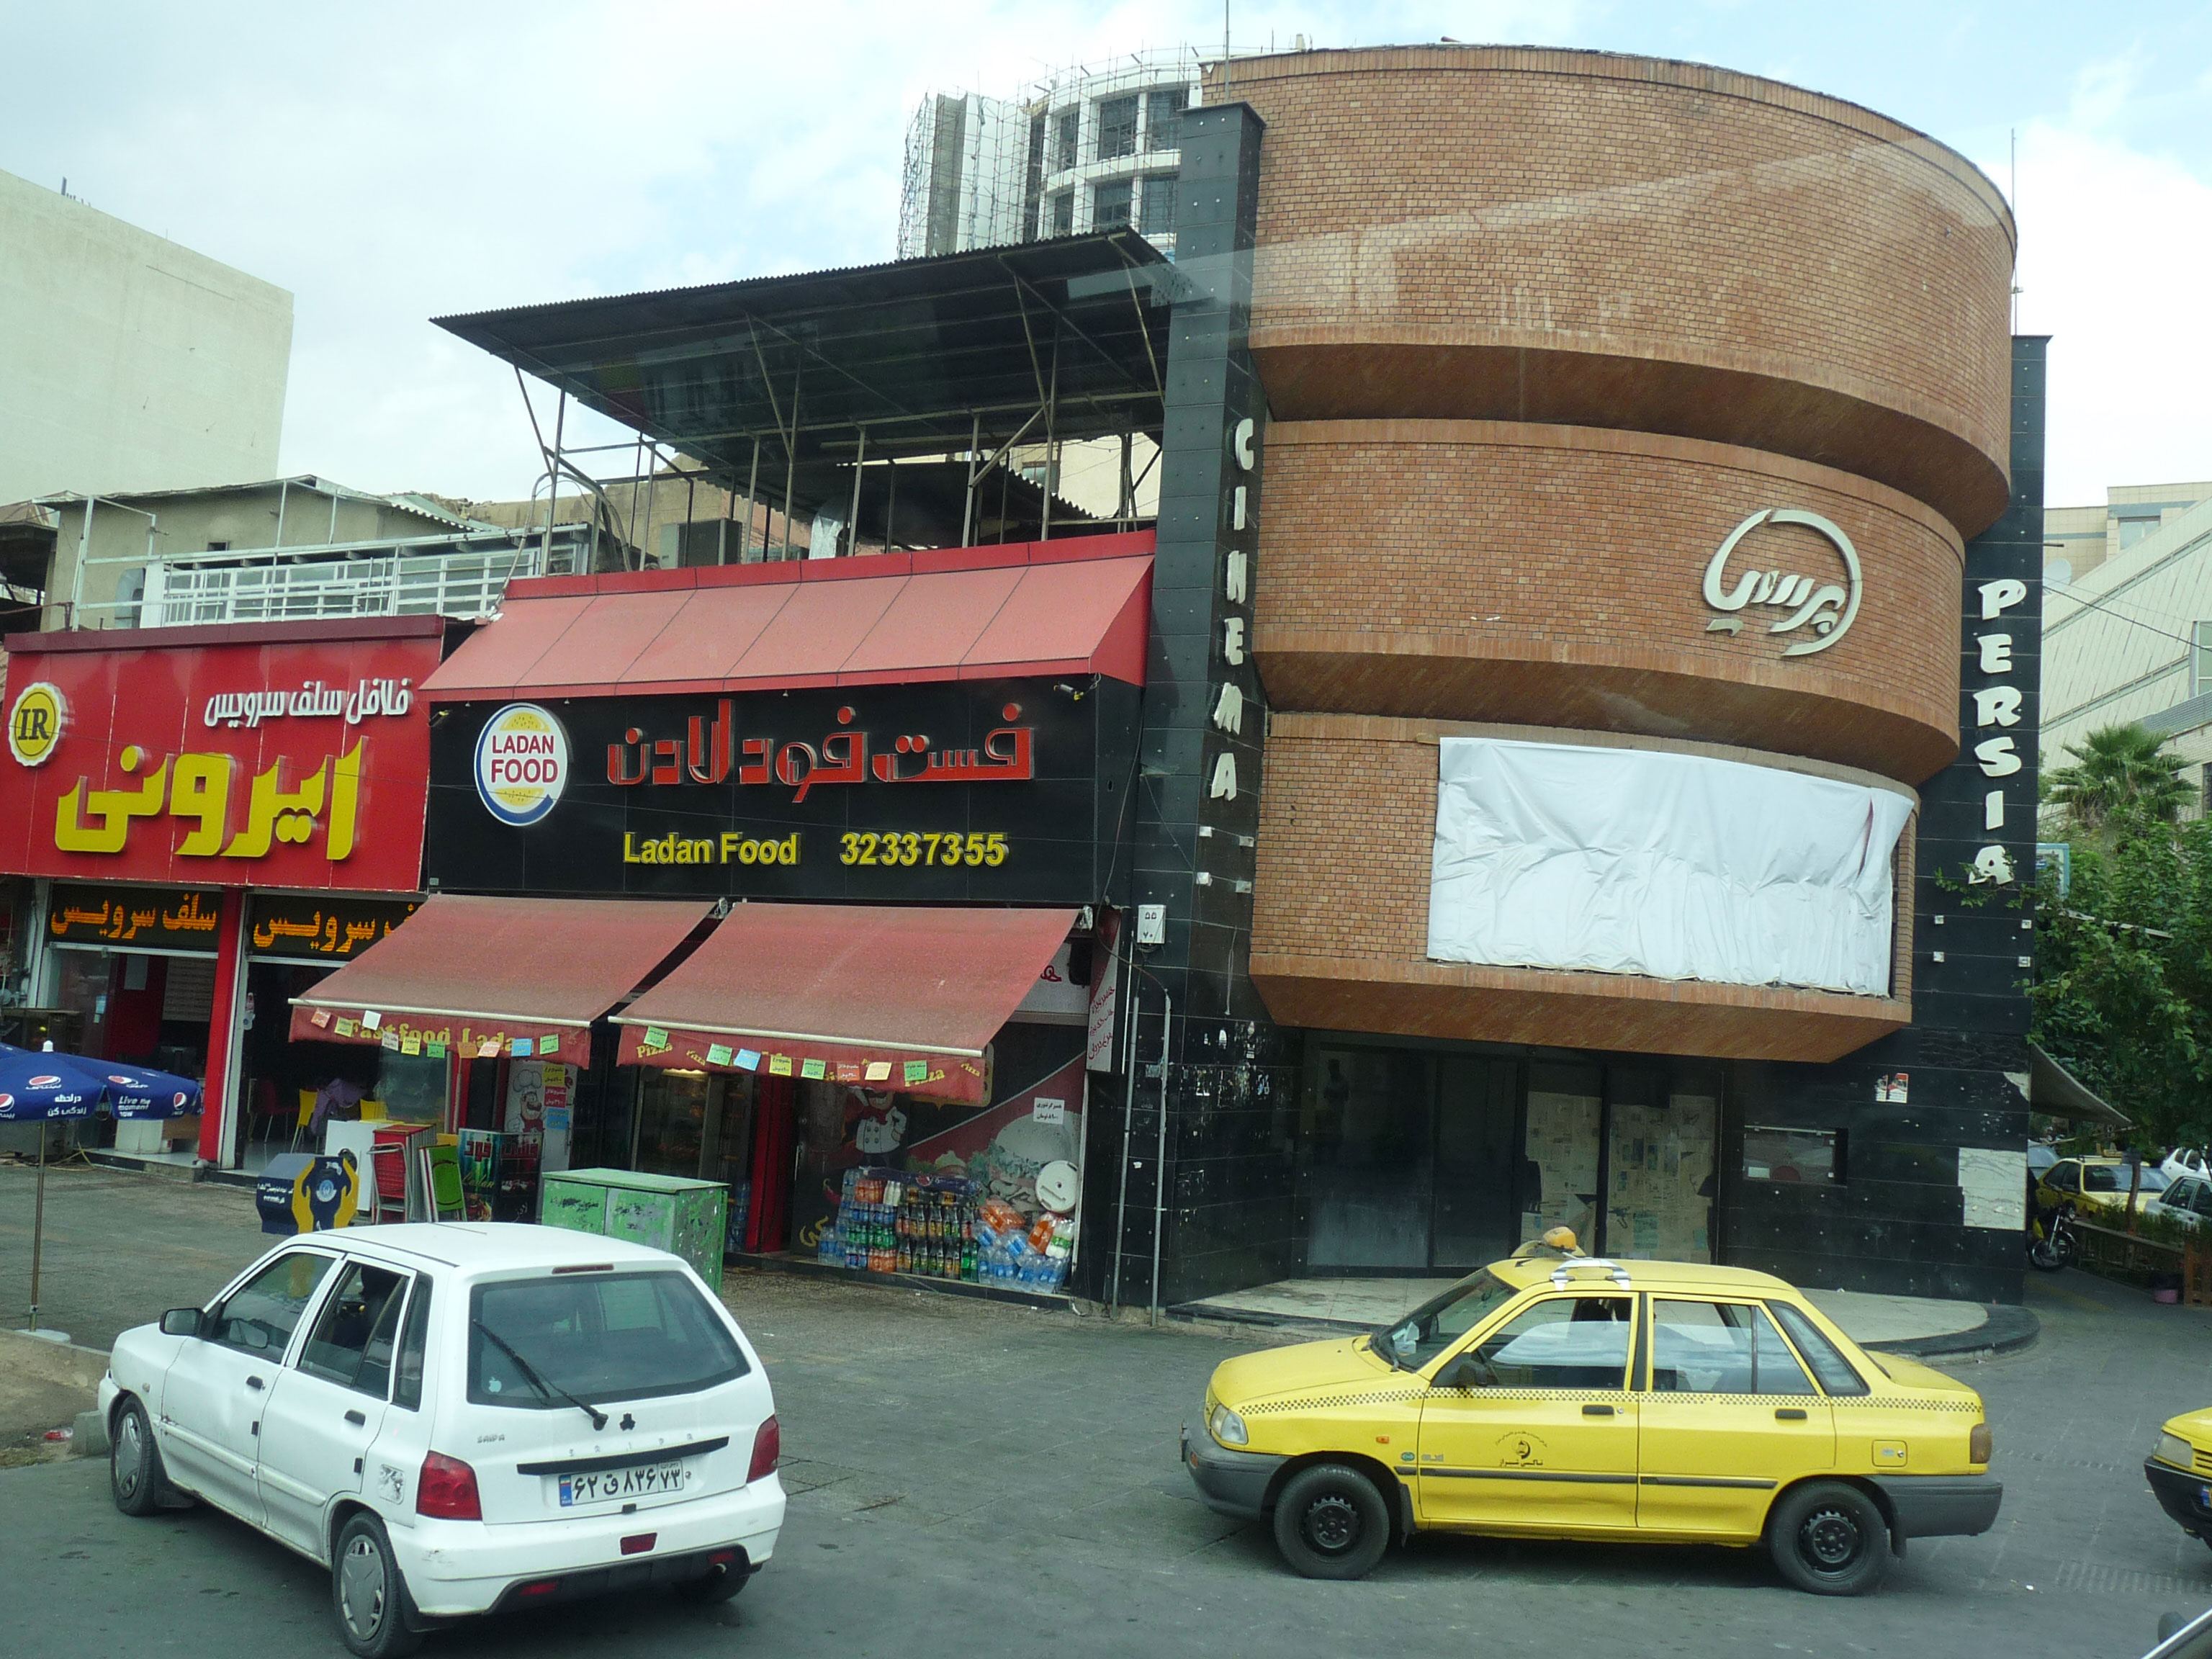 From the Iranian manufactured automobiles to the fast food restaurant with a familiar logo to the Persia Cinema in Shiraz, Iran is increasingly forced to meet its own needs in the face of economic sanctions.